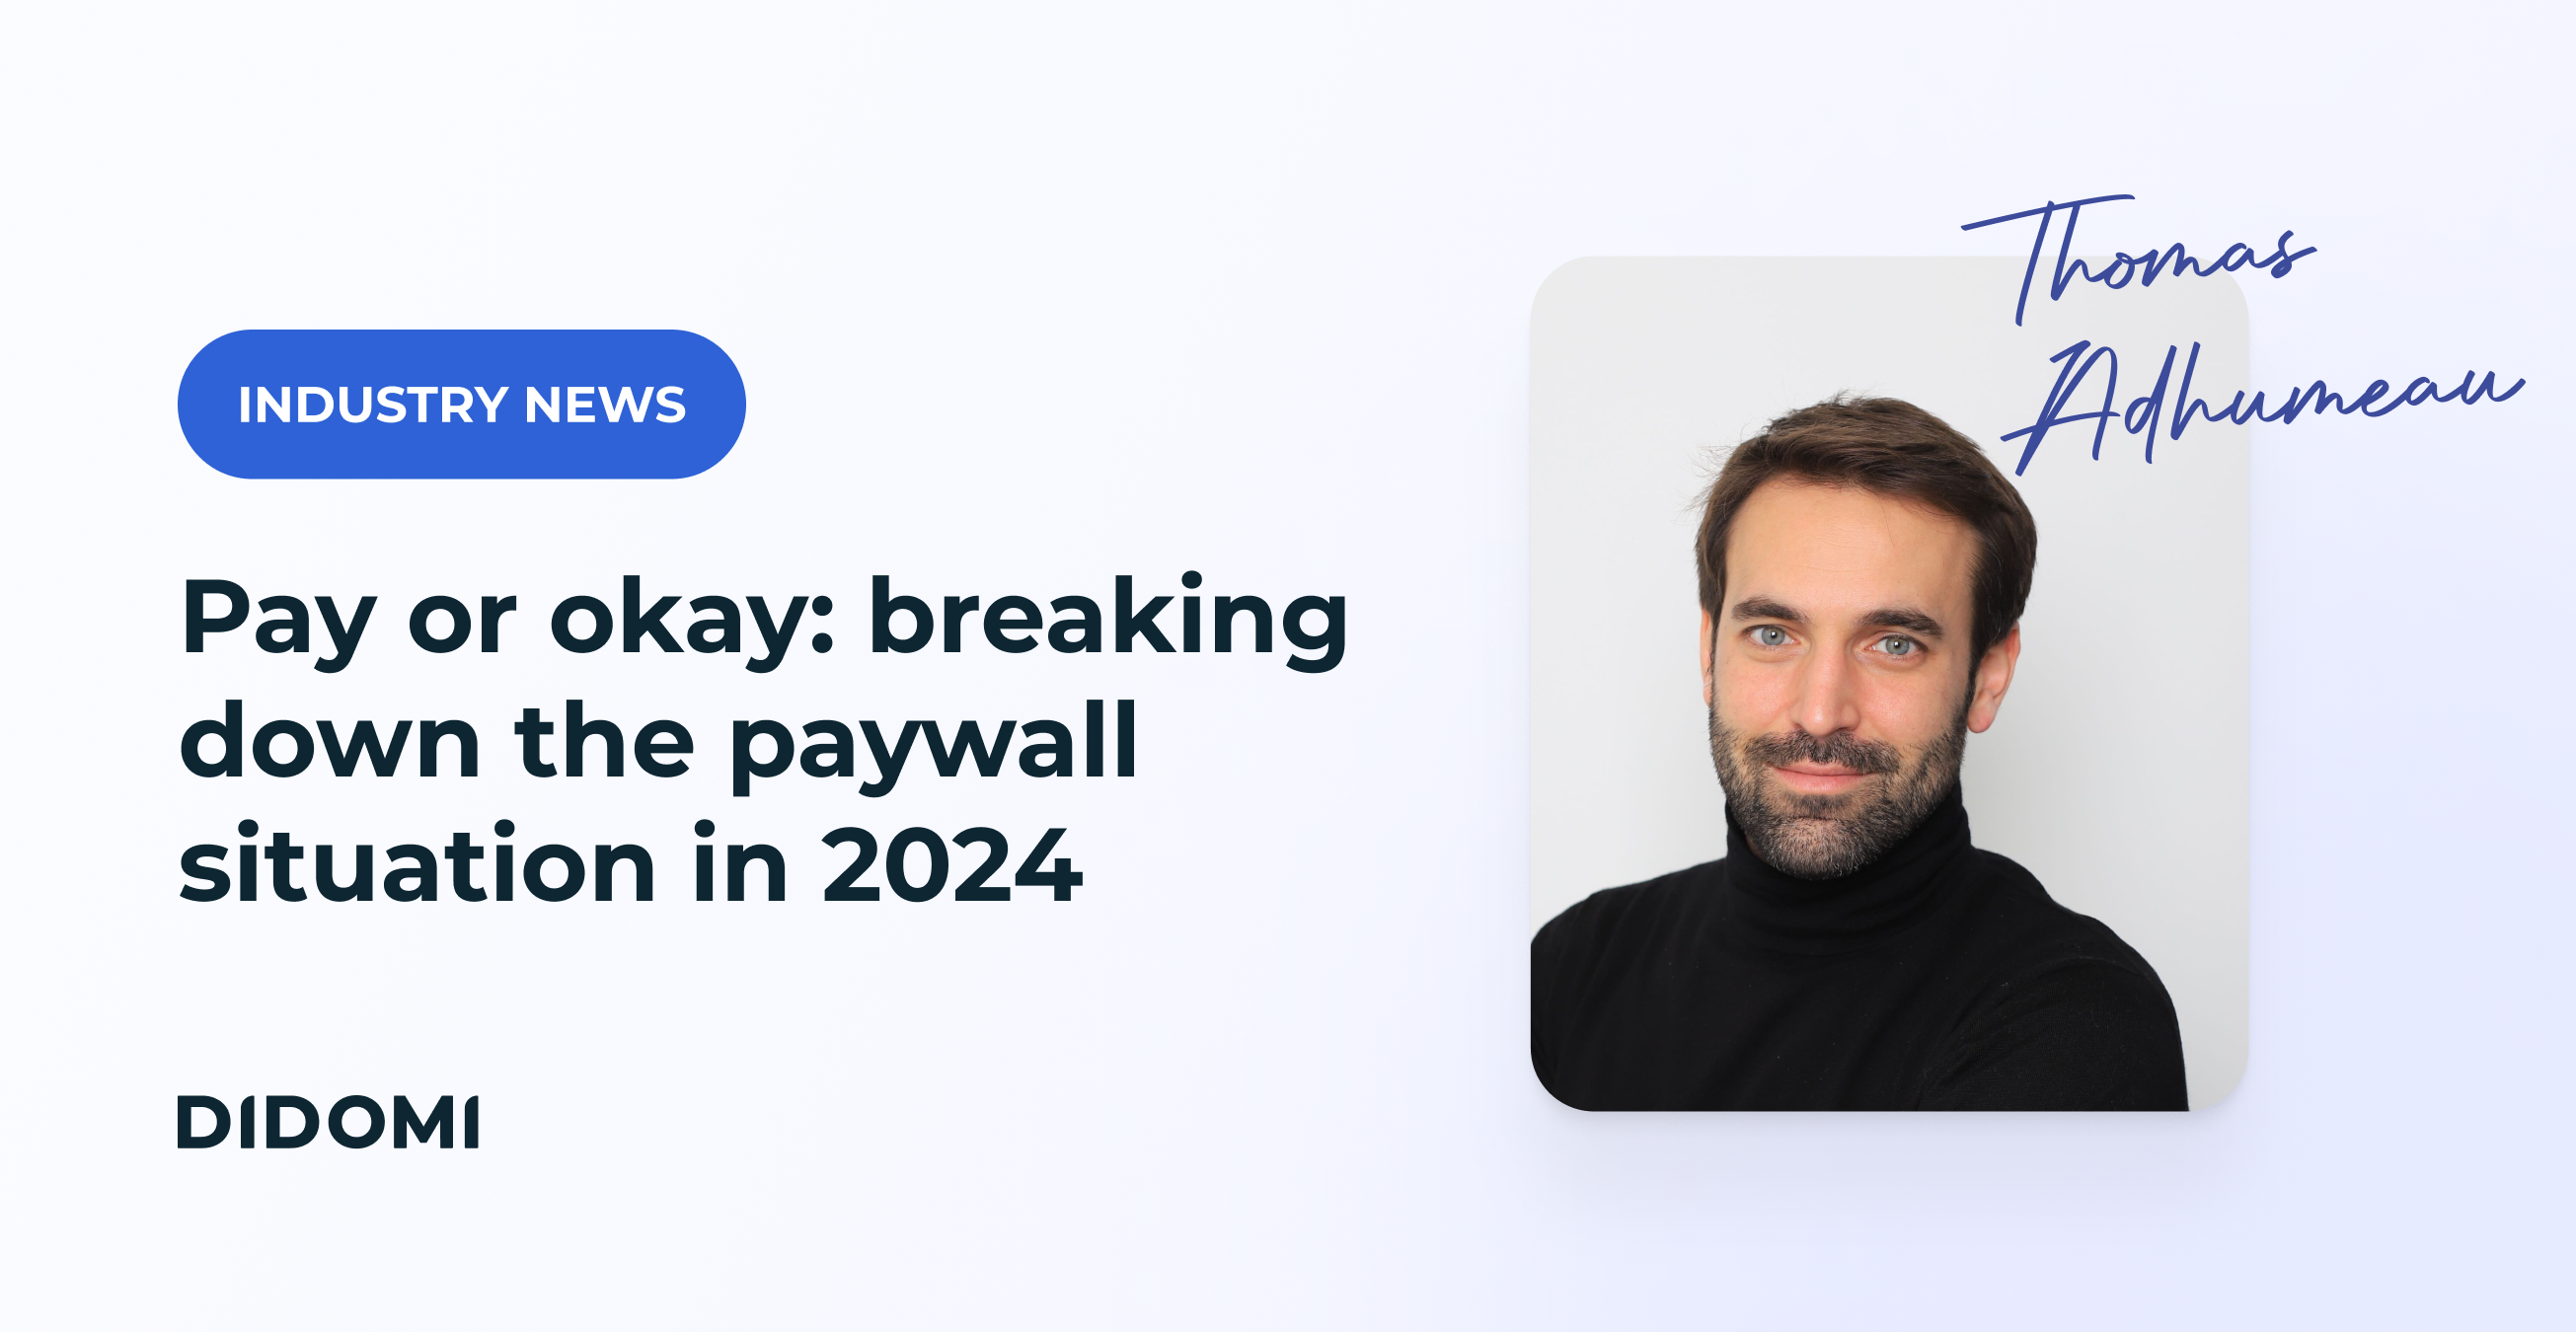 A picture of Thomas Adhumeau, along with his name and the title of the article "Pay or okay: Breaking down the paywall situation in 2024", with the label "industry news"